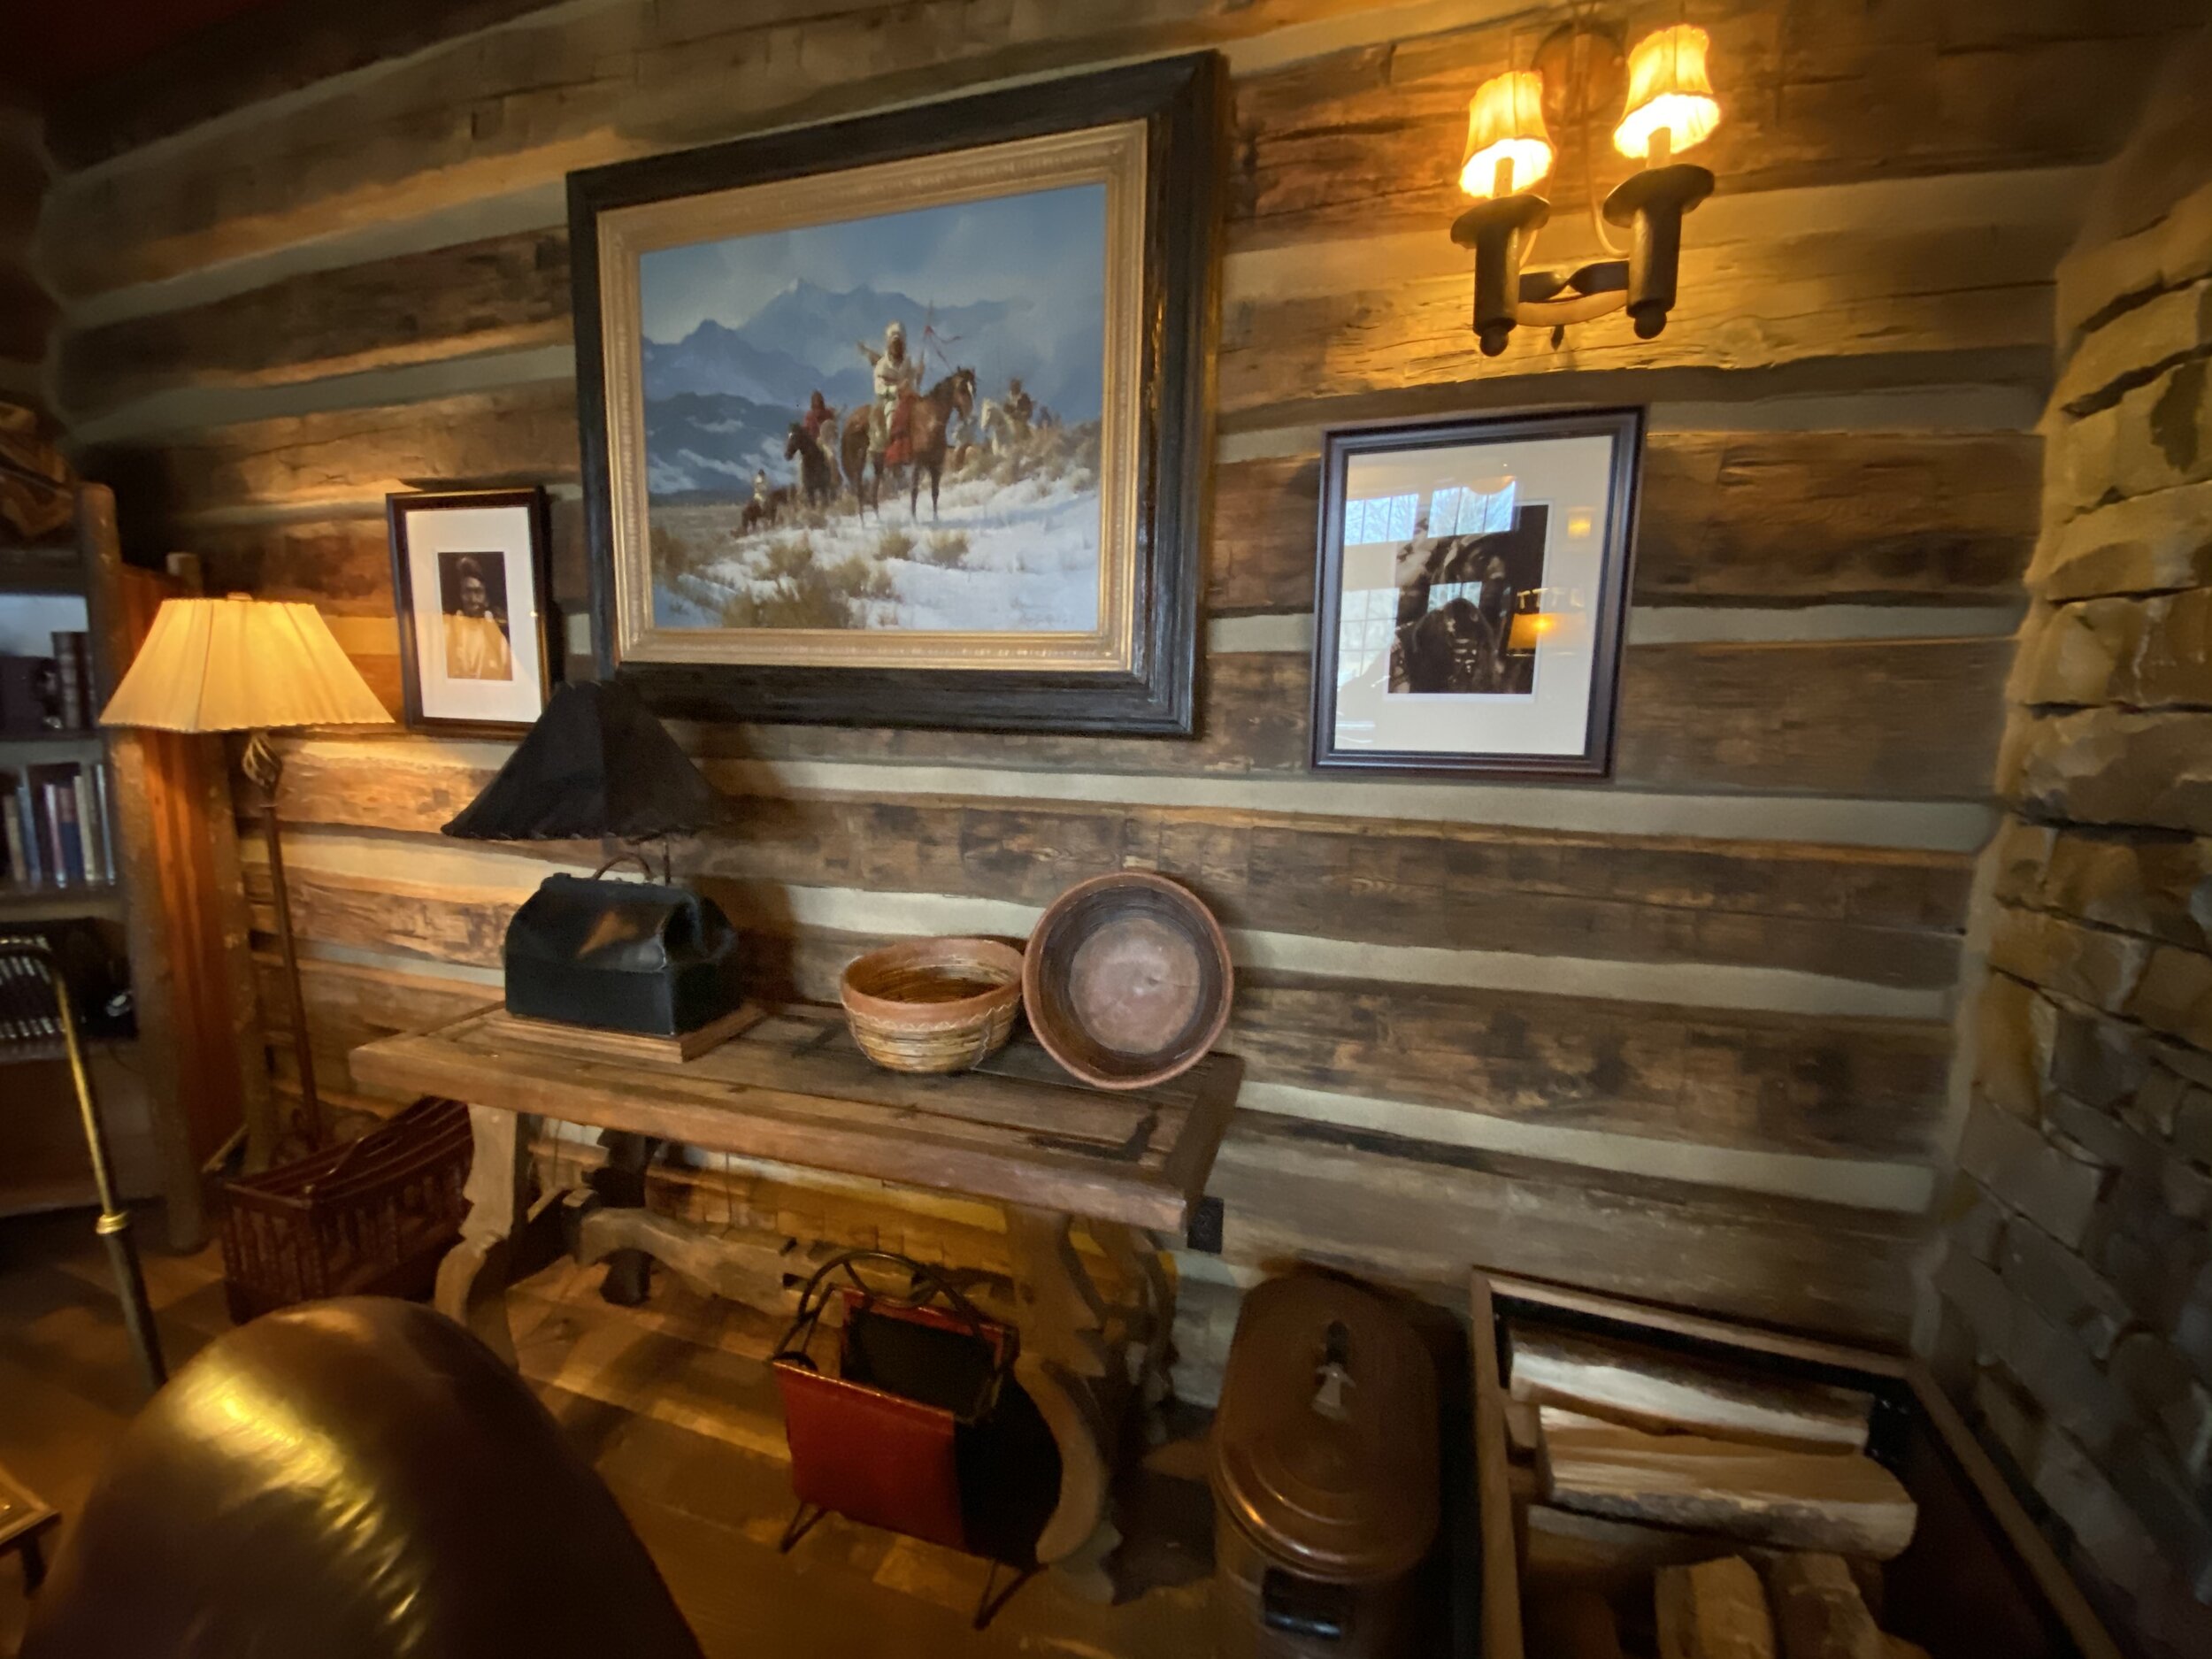 The exterior and interior of The Ranch at Rock Creek is rustic, elegant, and decidedly western.